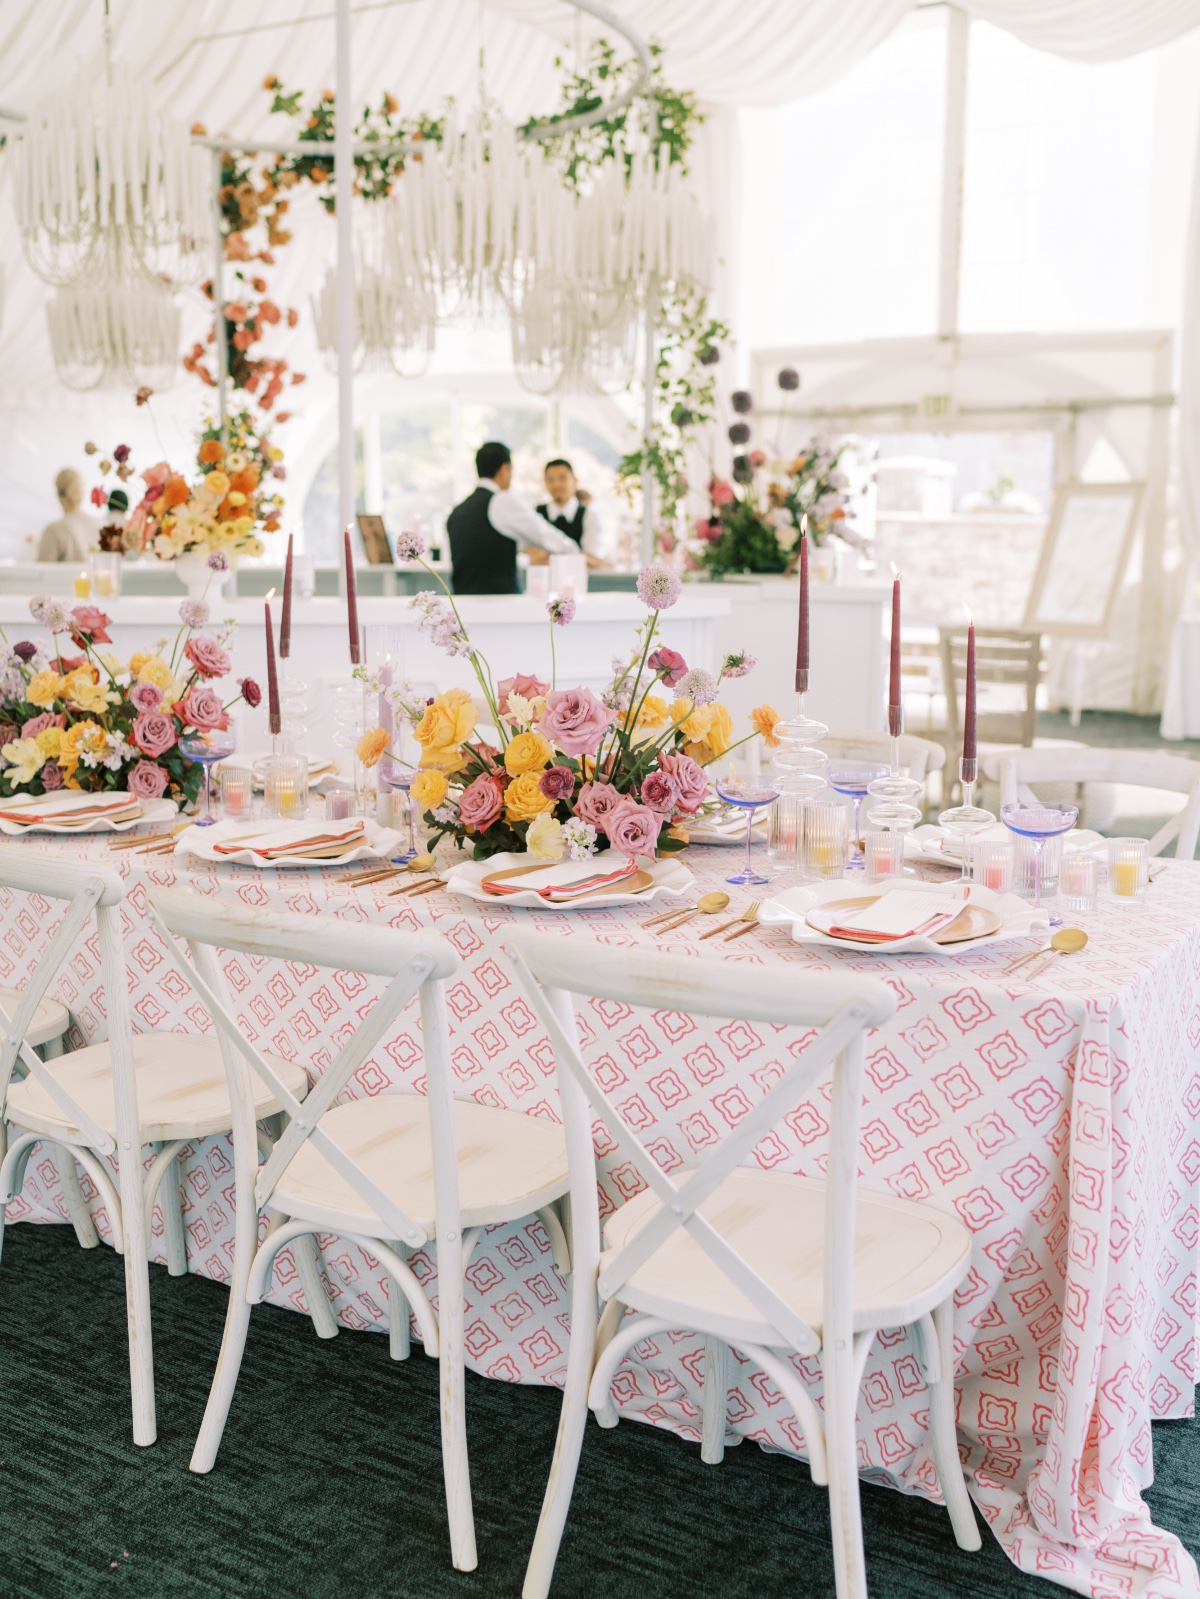 patterned table linens